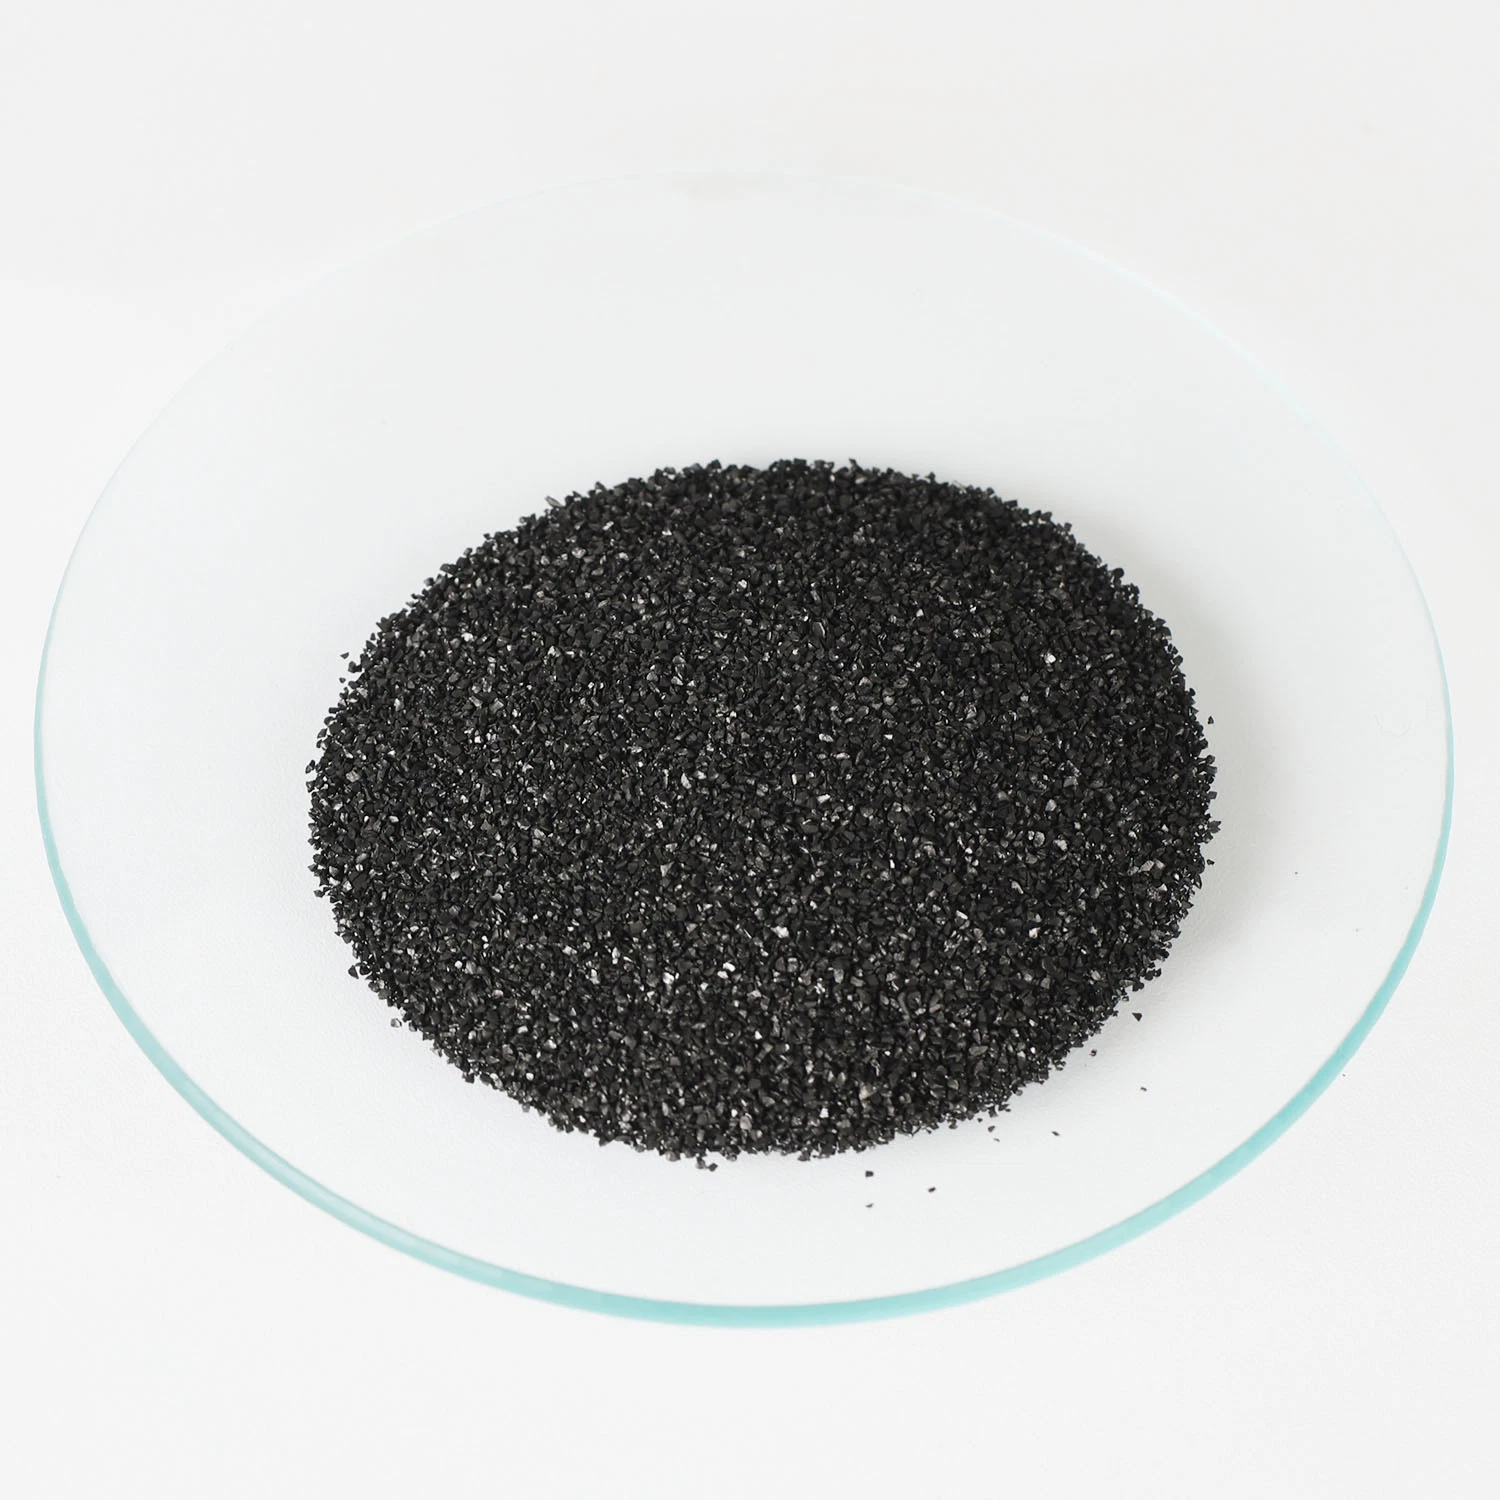 1000 Mg Per G Iodine Adsorption Value Black Coconut Shell Granular Activated Carbon Applied in The Field of Condensating Water